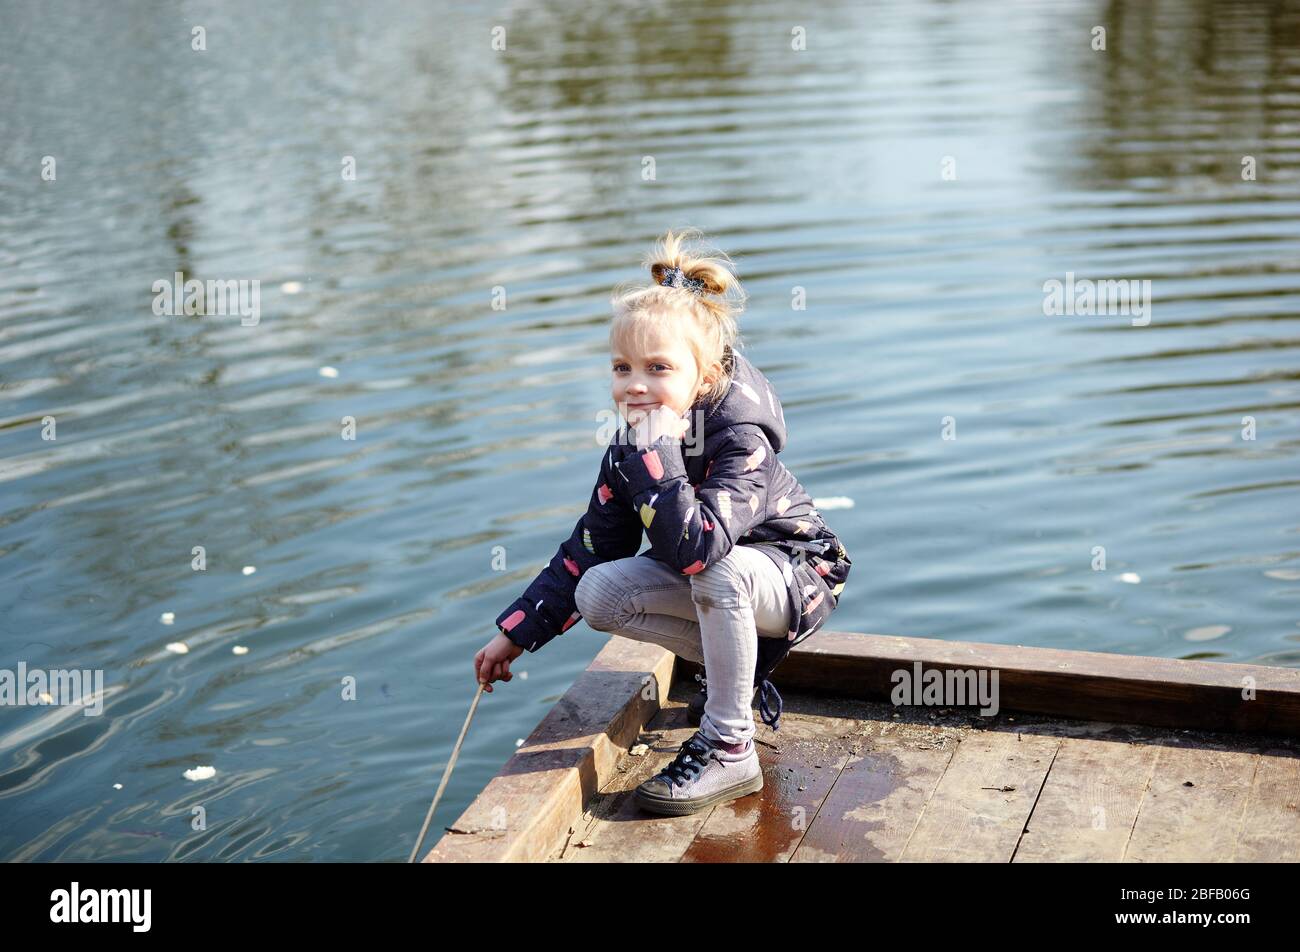 Cheerful child in blue jaket posing outdoors. Caucasian young girl enjoys a bright spring lifestyle Stock Photo